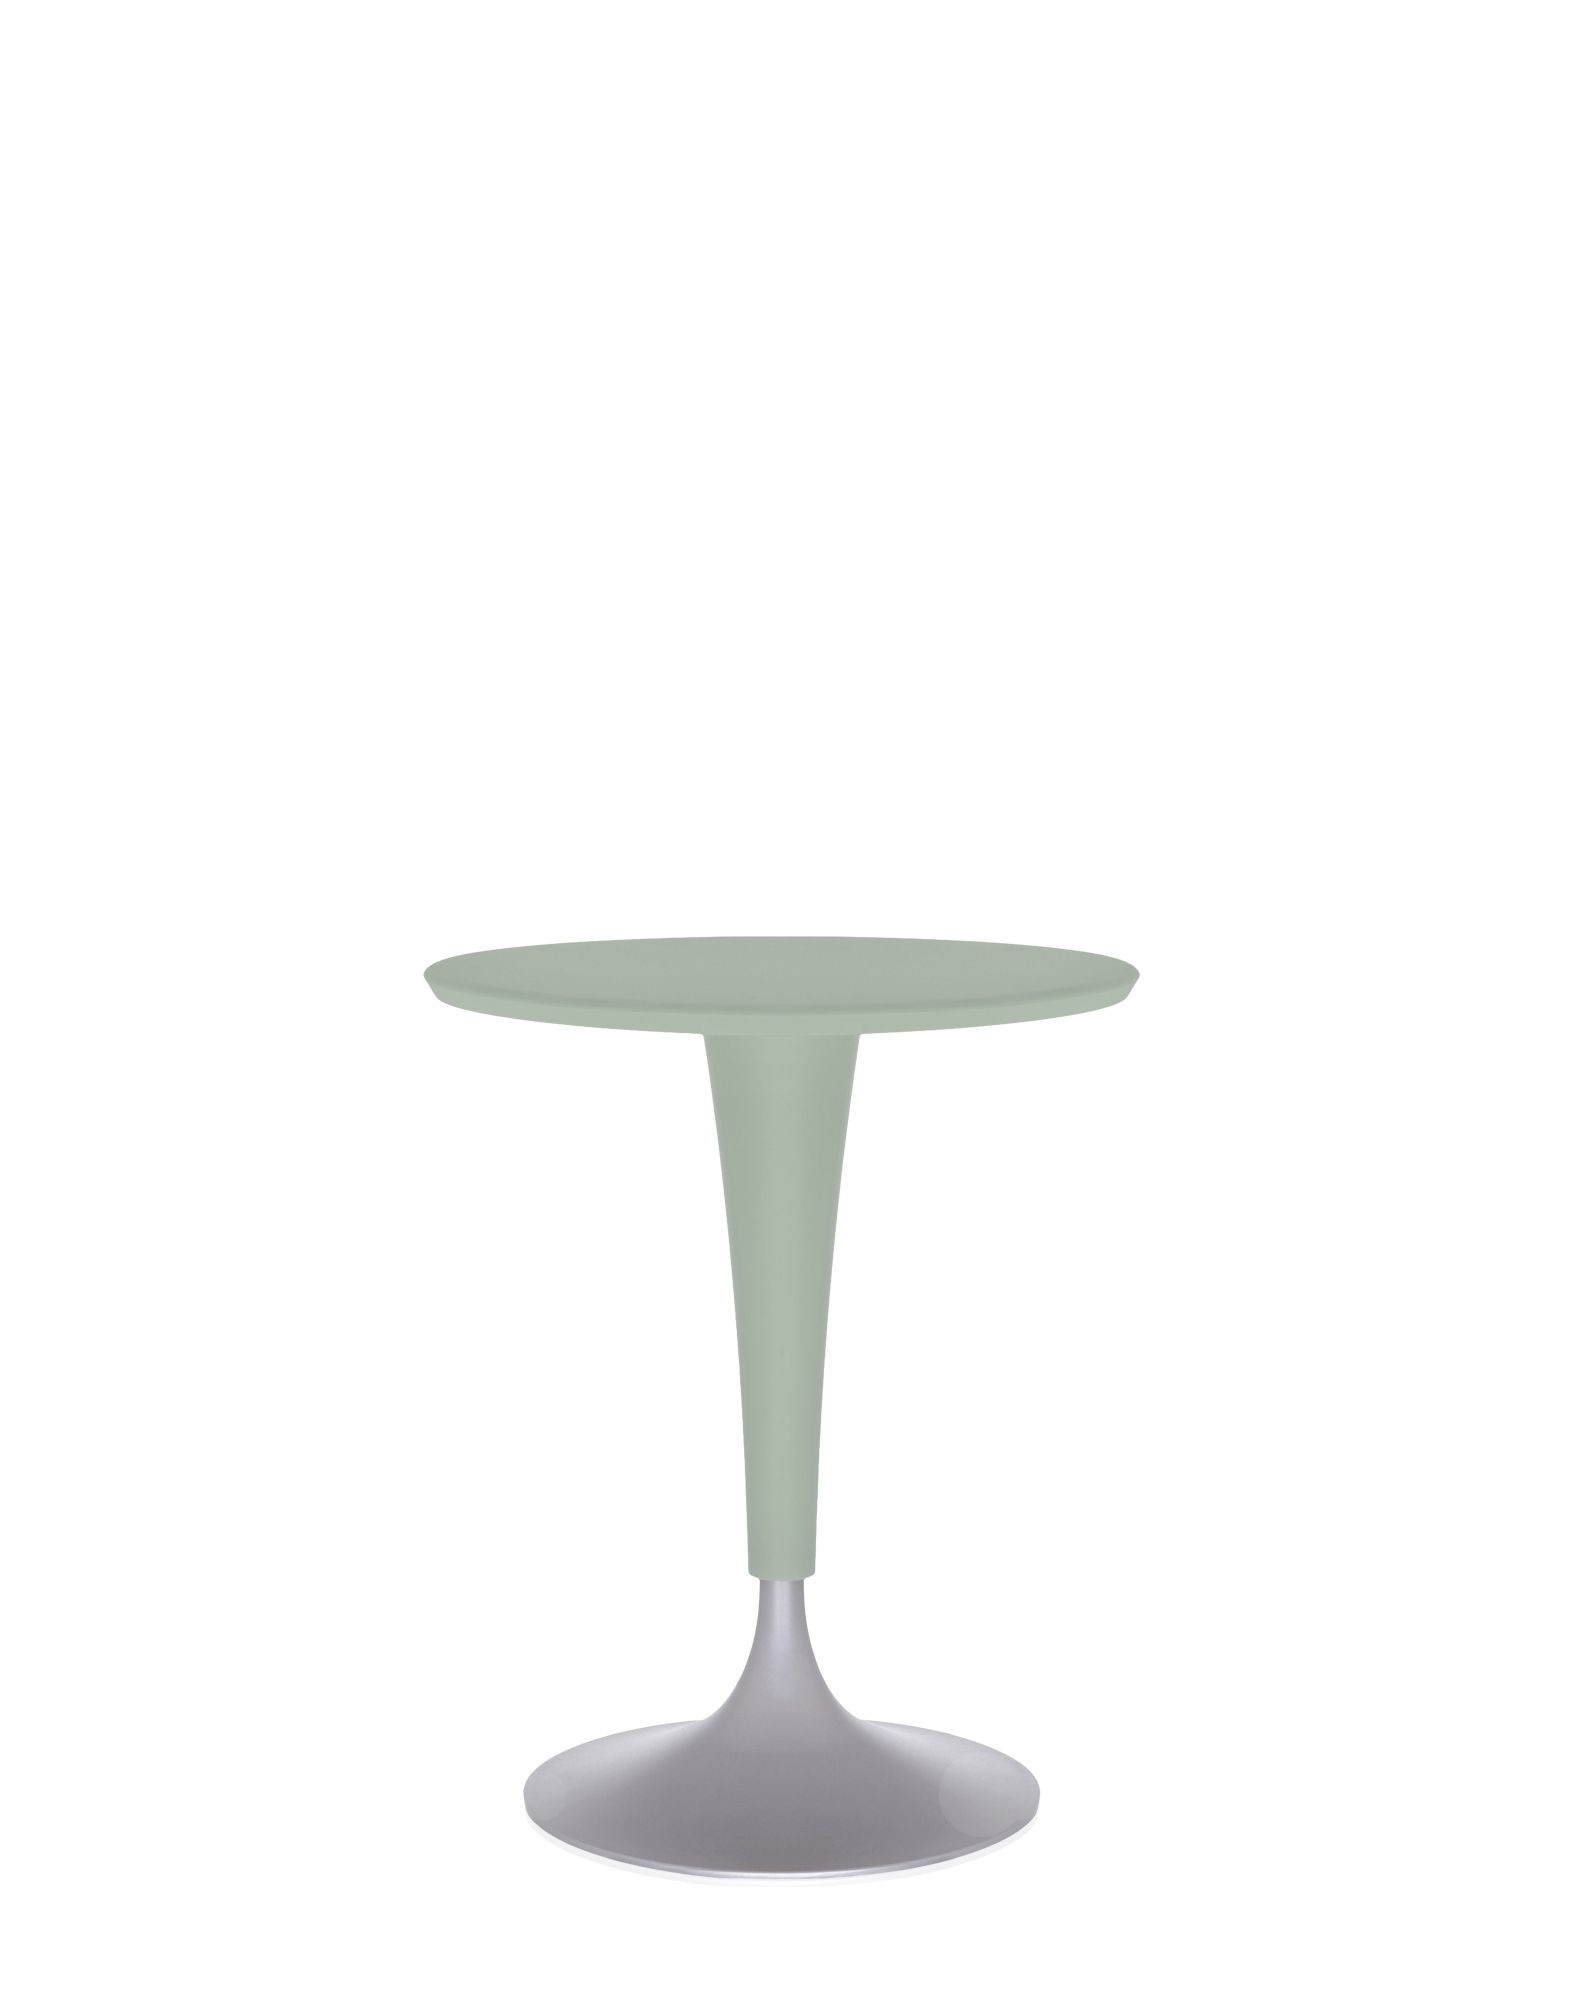 MADE IN ITALY☆イタリア製☆table DR.NA by STARCK FOR Kartell